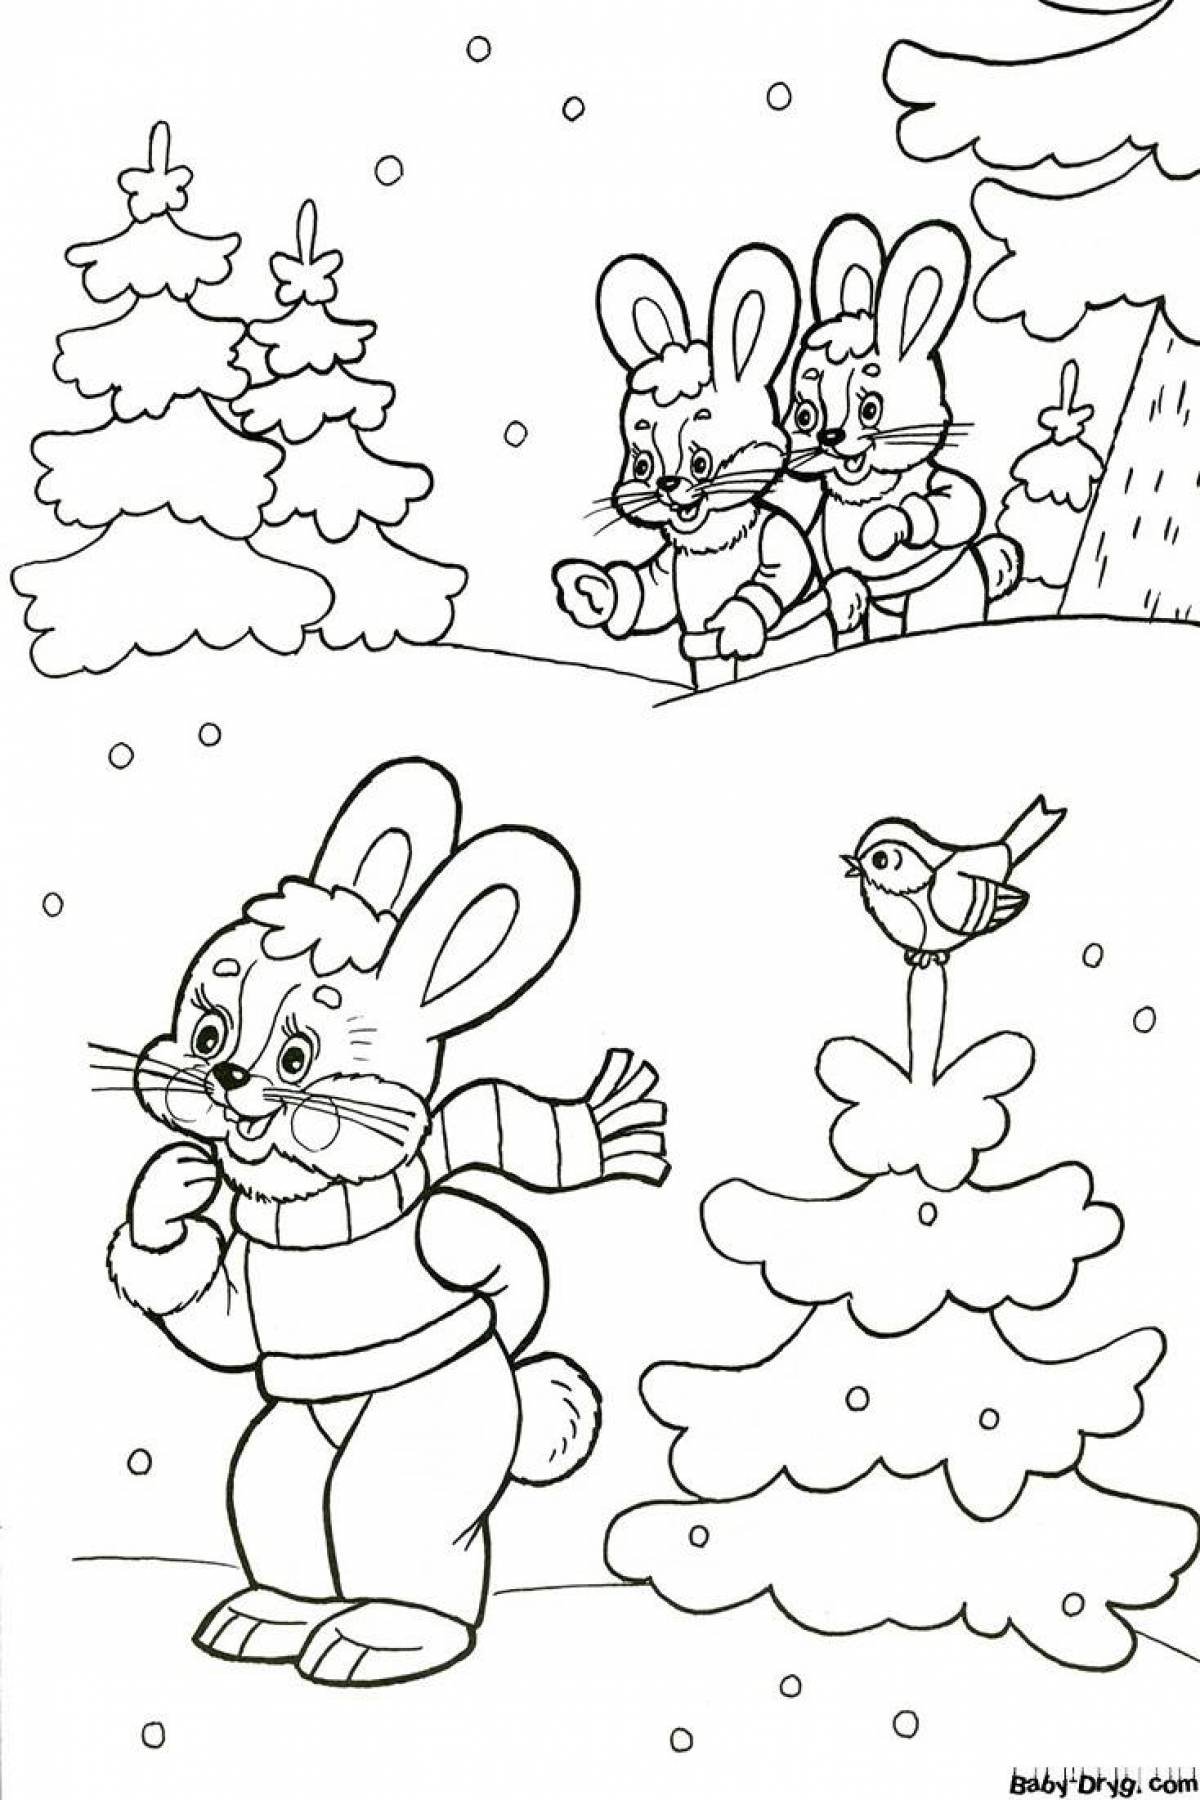 A fun winter coloring book for kids 6-7 years old